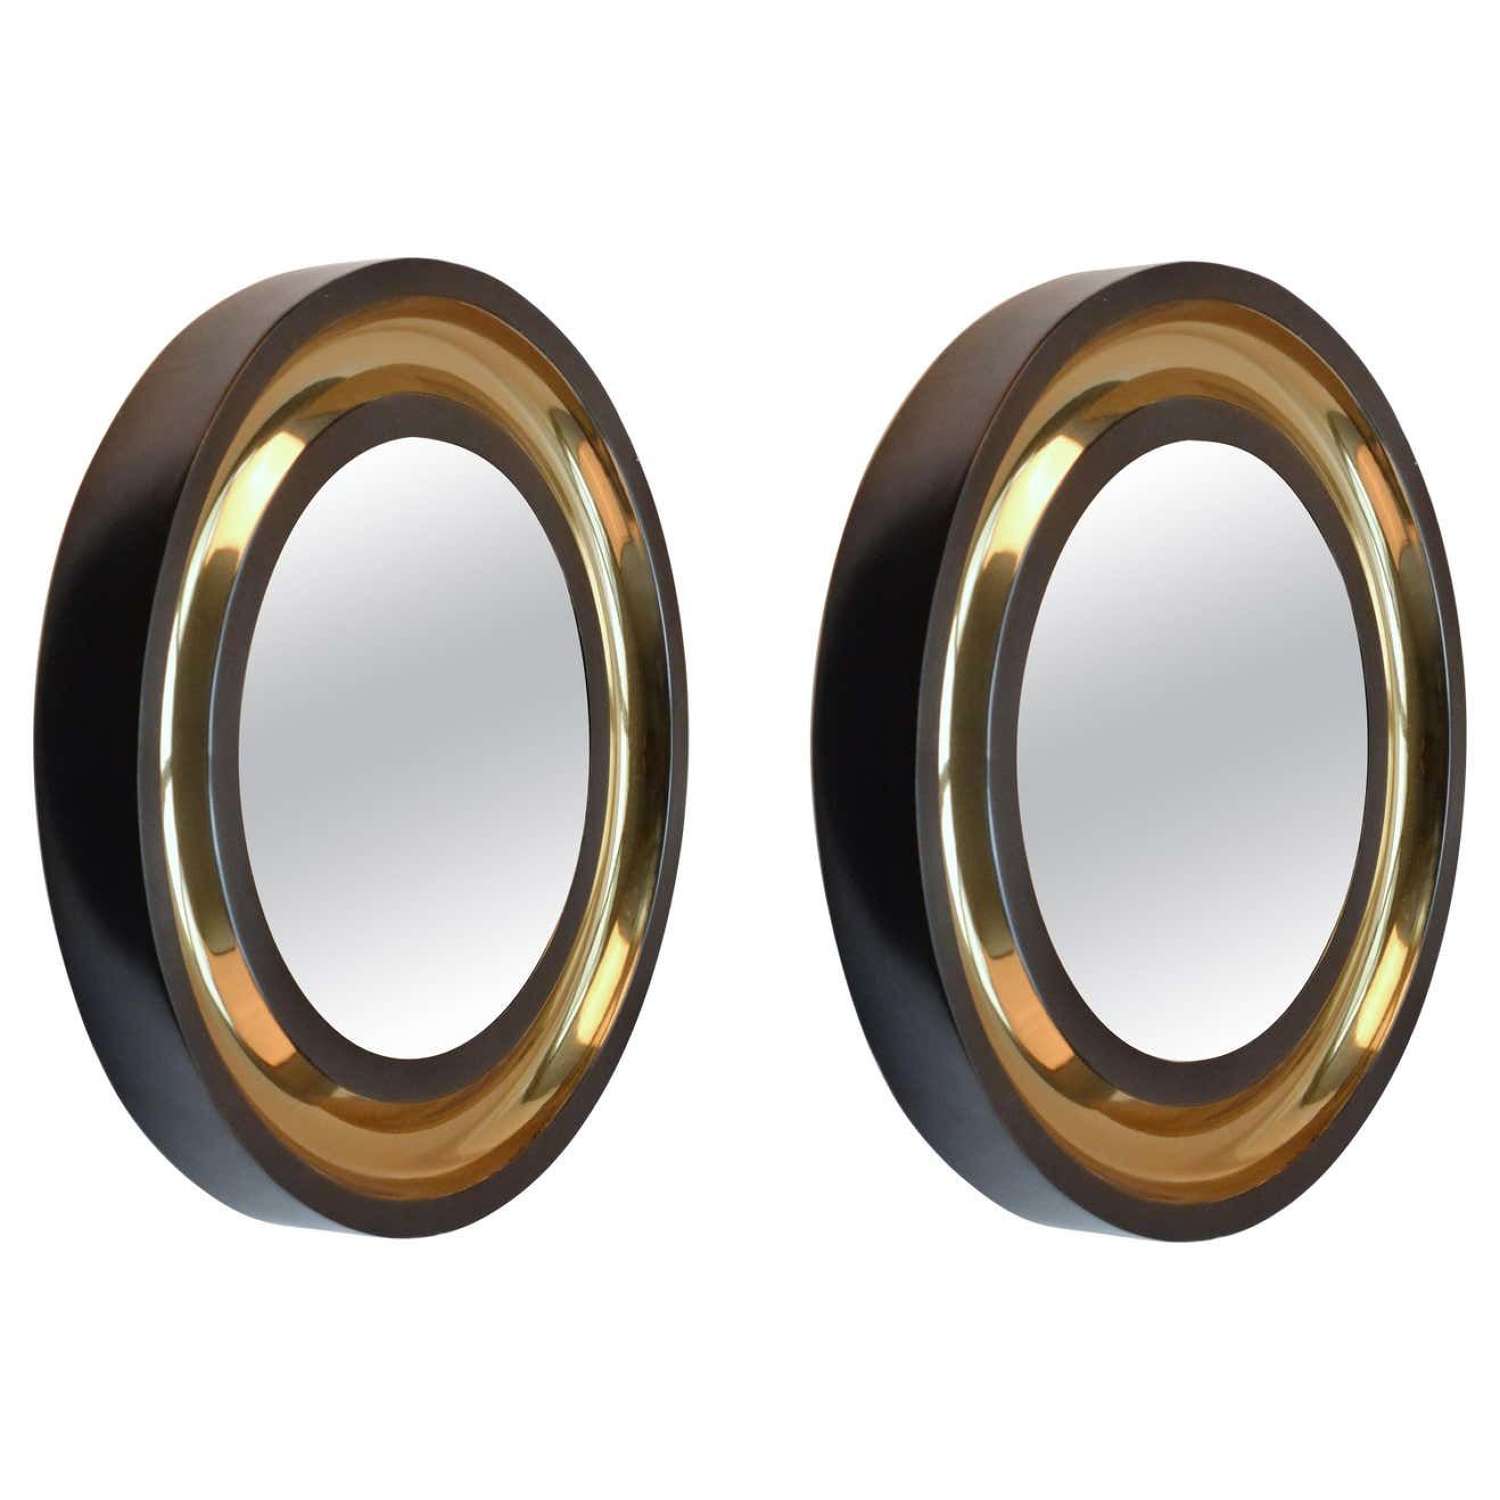 Pair of Round Wall Mirrors Patinated with Bronze Finish